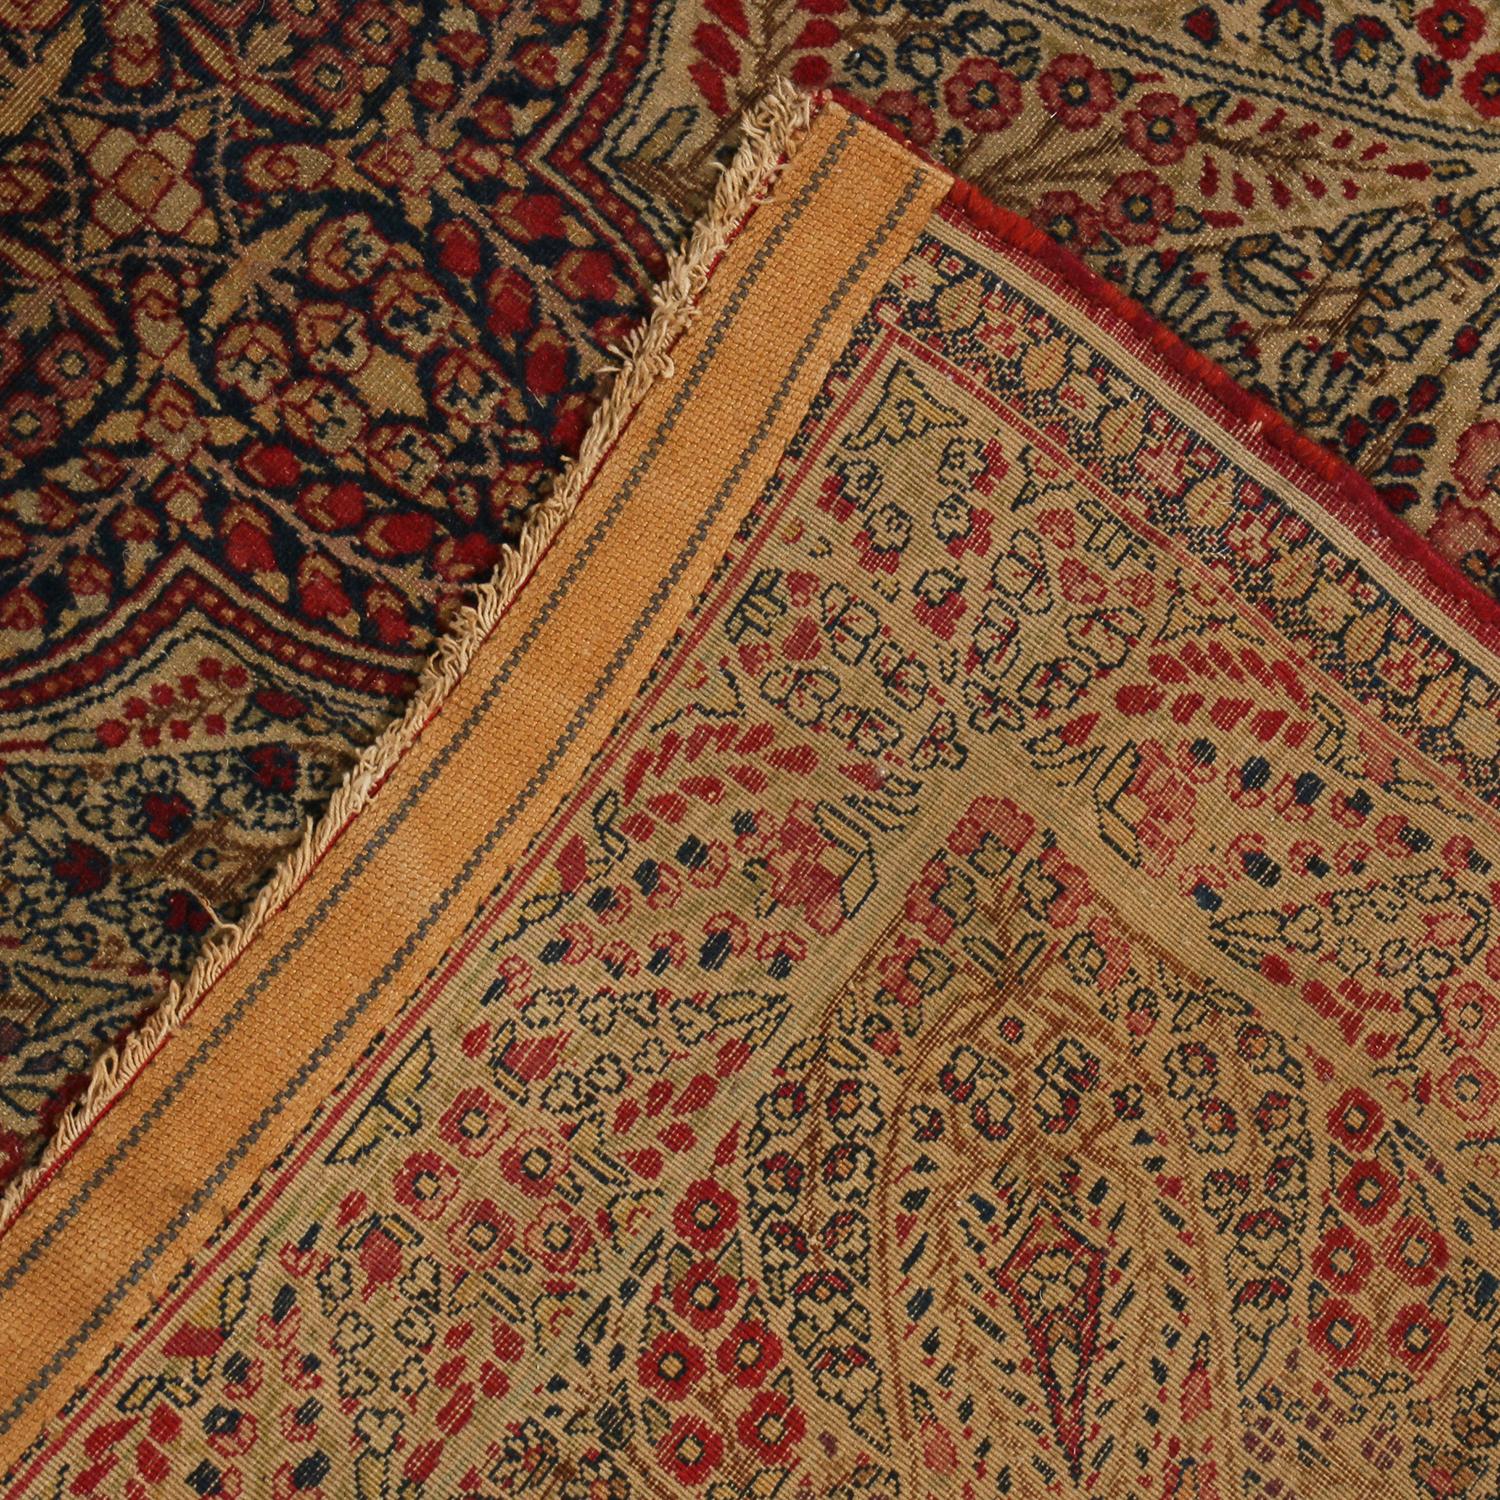 Antique Kerman Lavar Red and Blue Wool Persian Rug 1